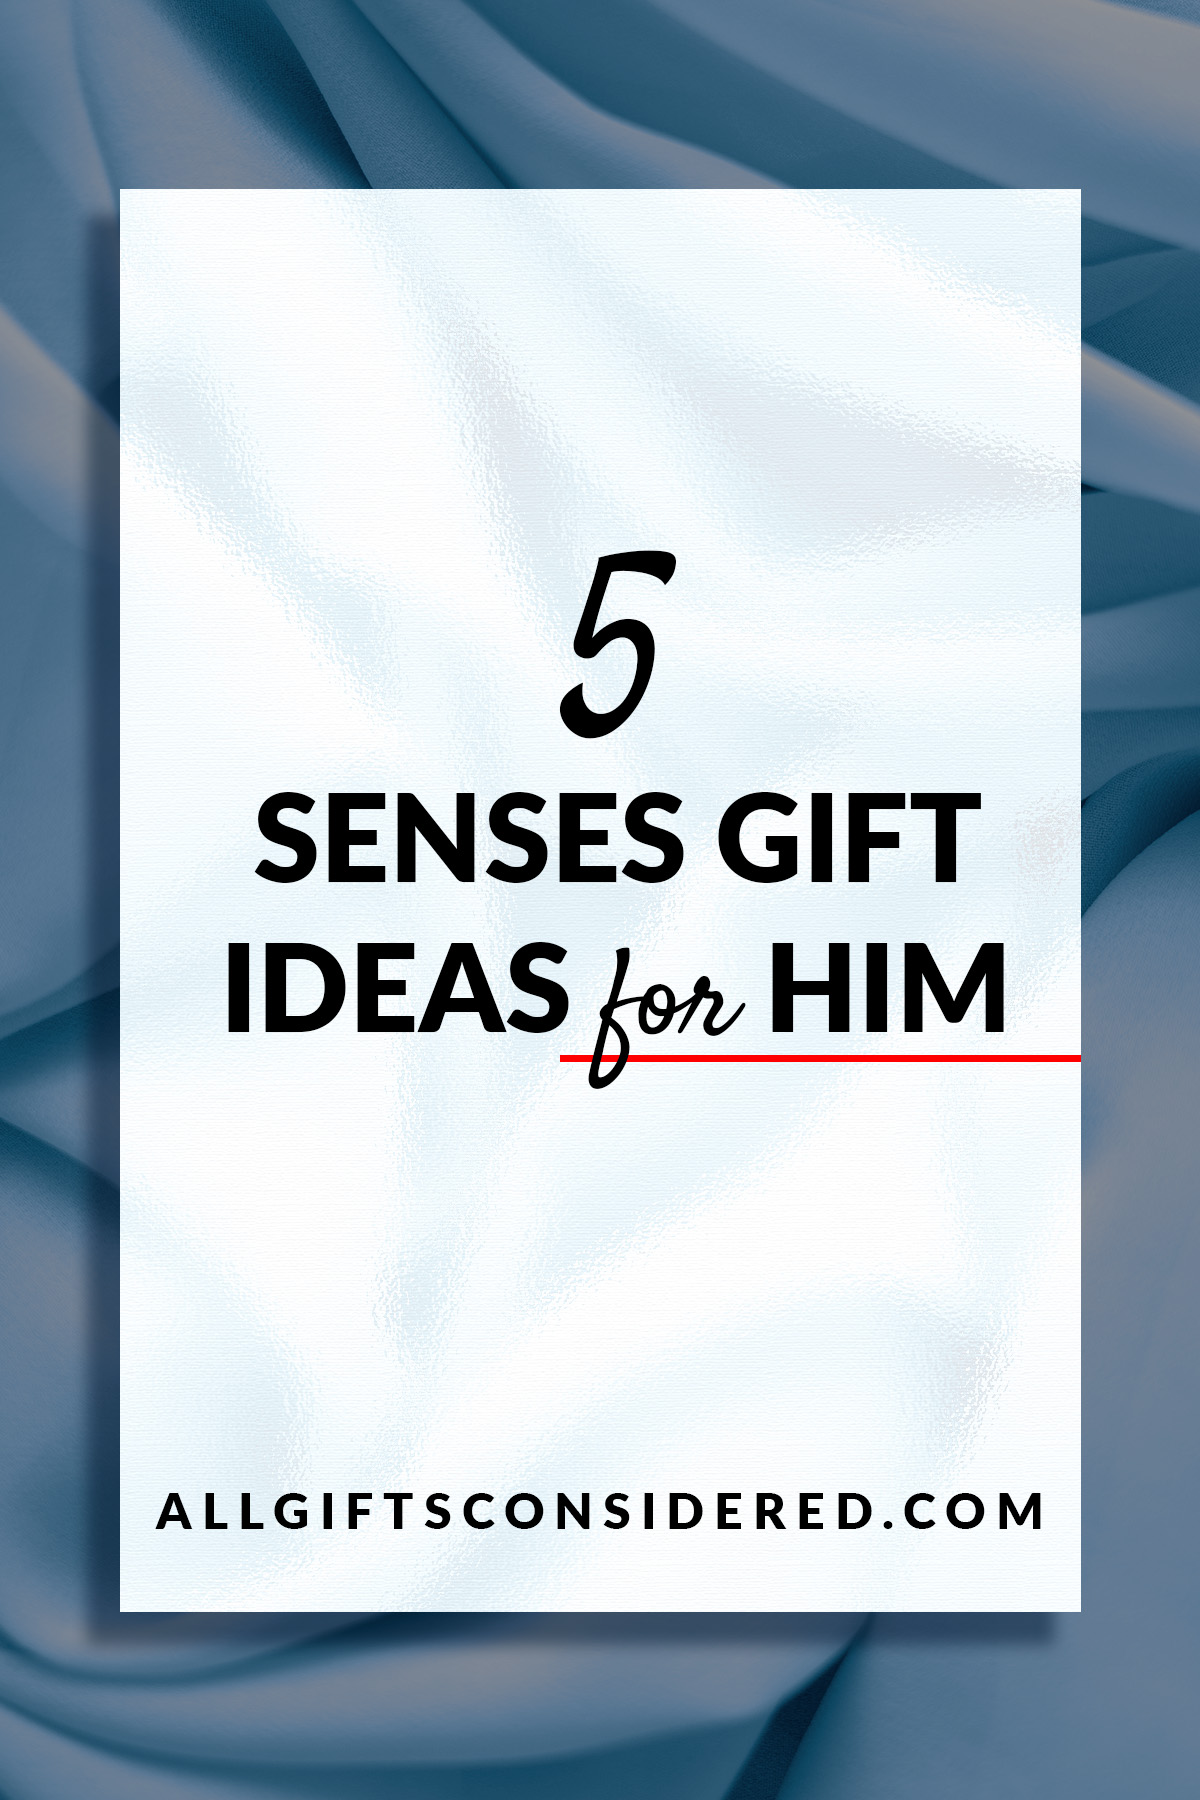 5 senses gift ideas for him - feat image